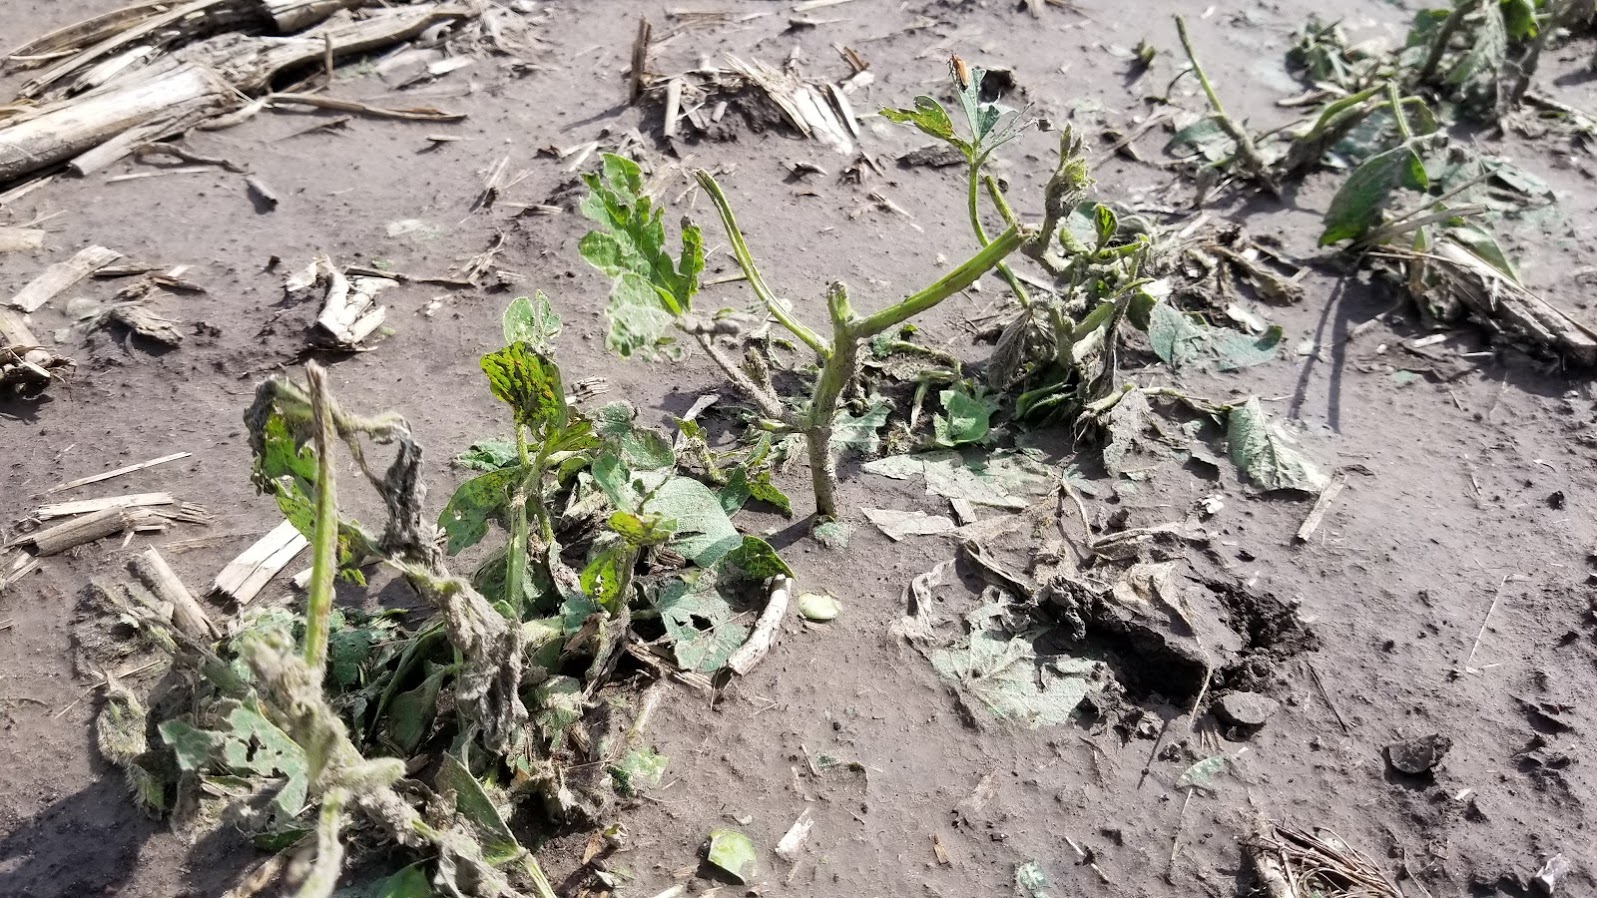 Hail damage to soybeans